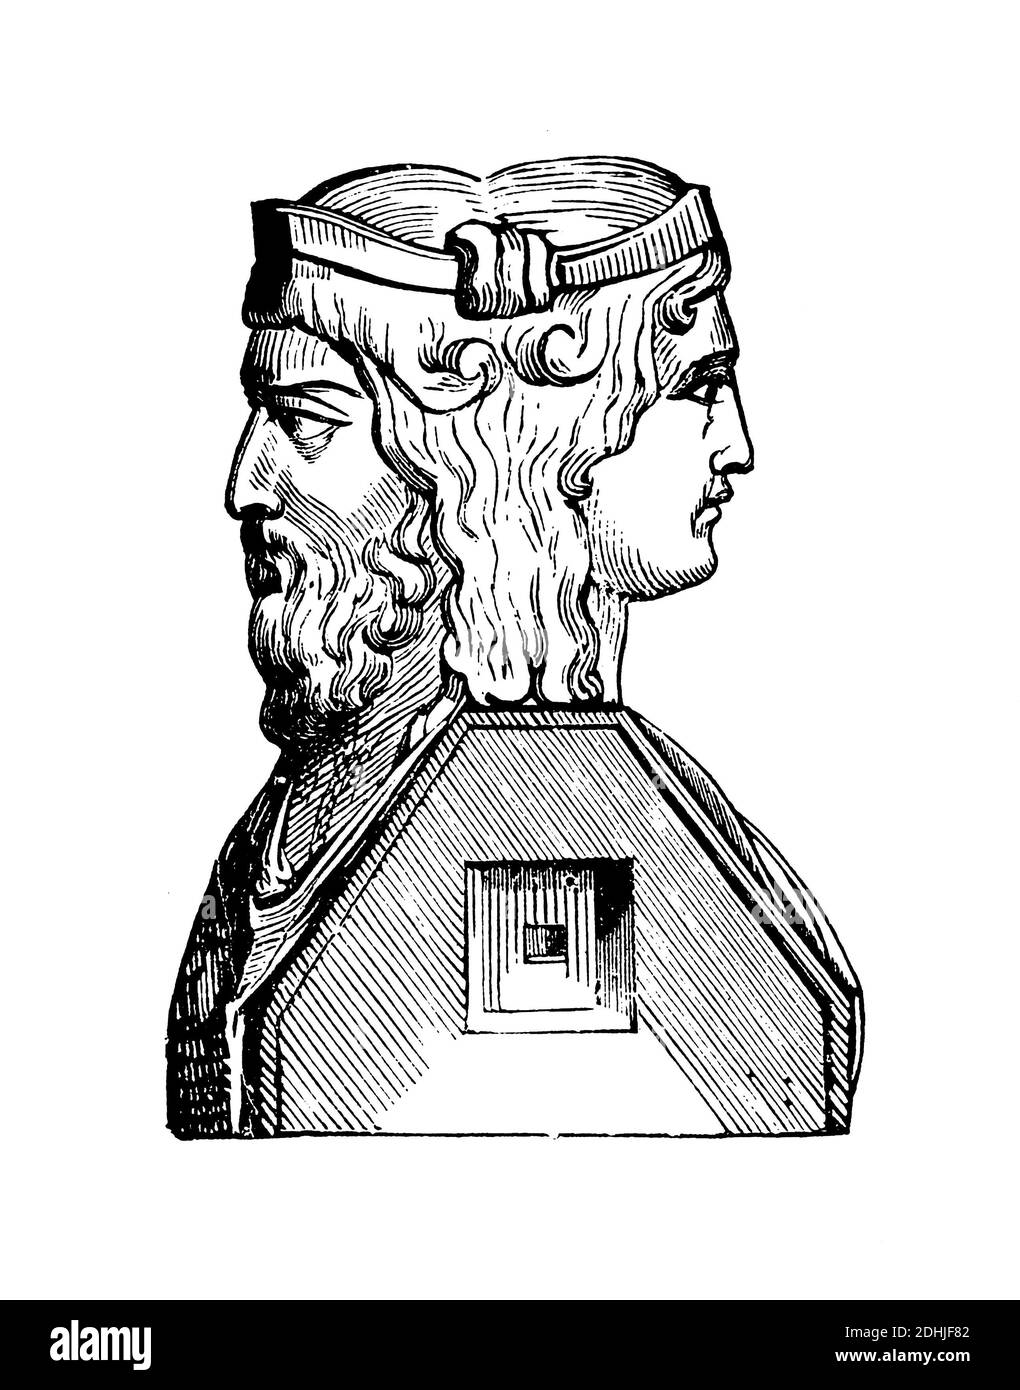 Original artwork of Janus, the god of beginnings and transitions,gates, doors, passages, endings and time in Roman religion. Published in A pictorial Stock Photo